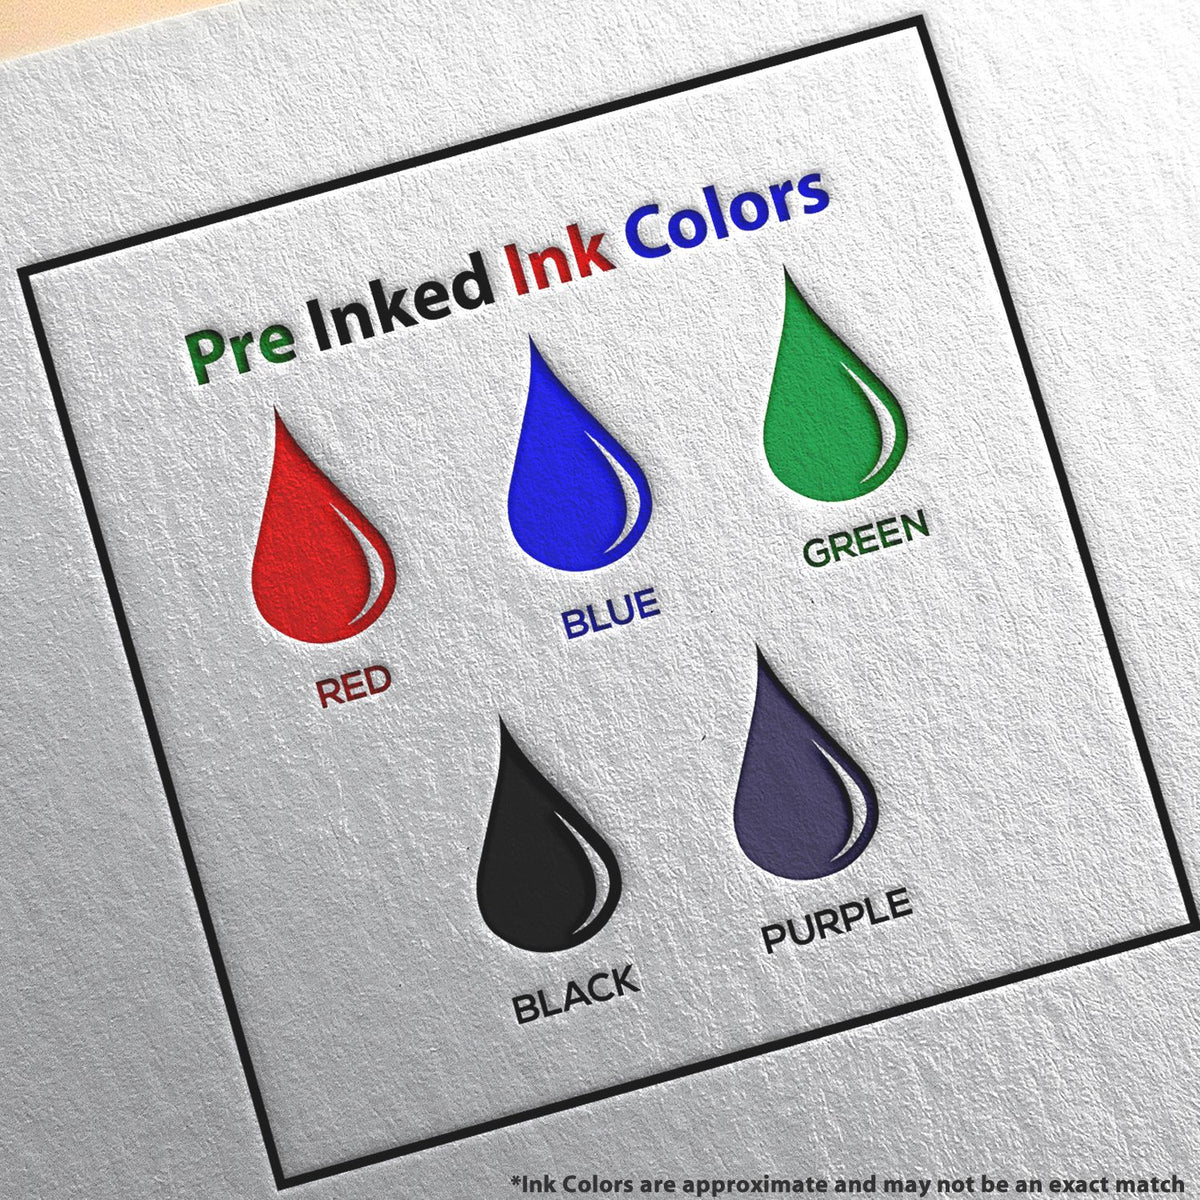 A picture showing the different ink colors or hues available for the Slim Pre-Inked Michigan Professional Geologist Seal Stamp